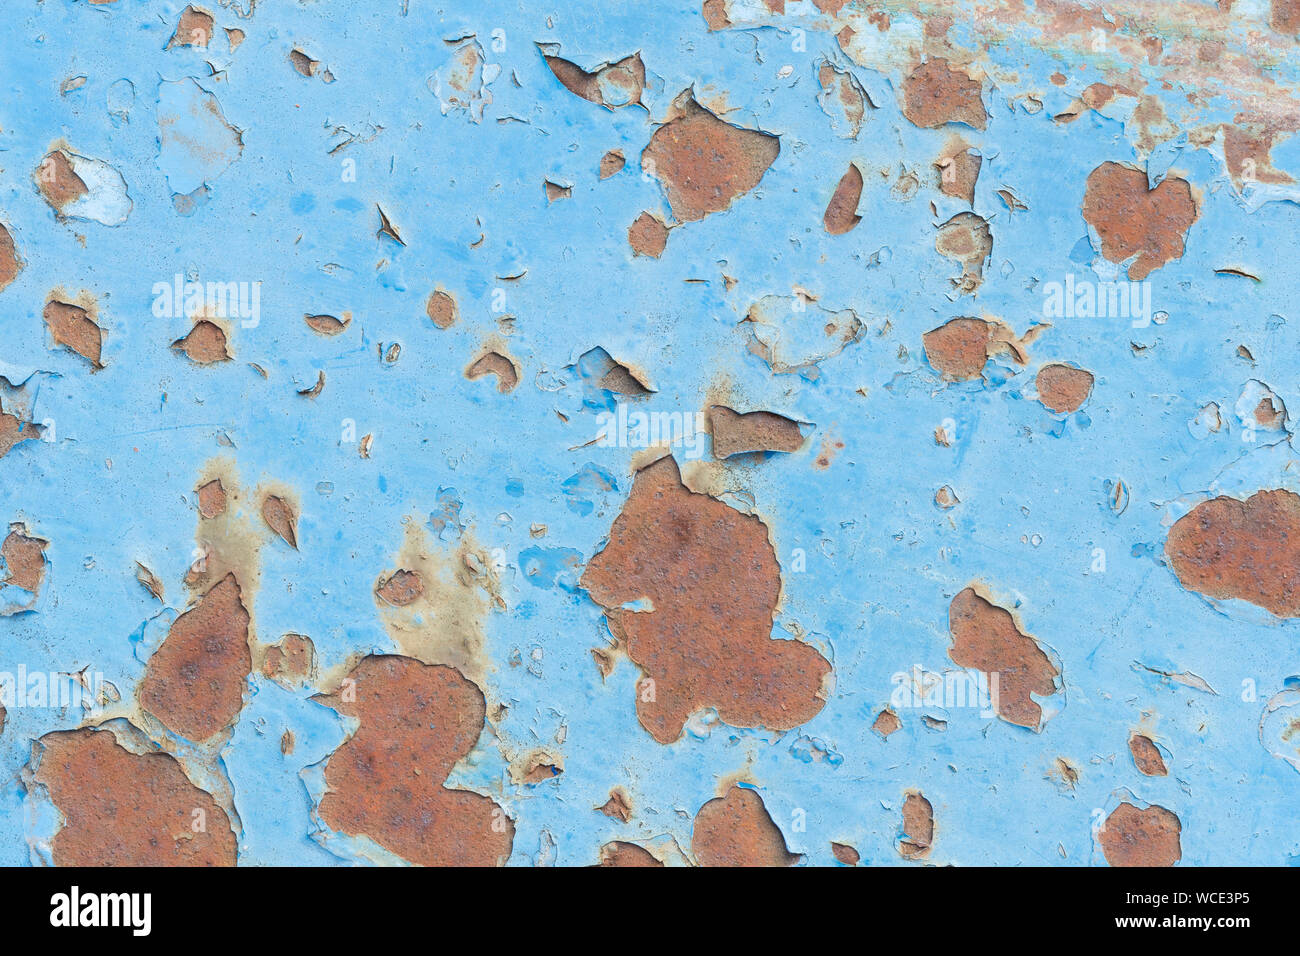 Close-up of a weathered and worn sheet metal plate painted in light blue. Paint is partly peeled off revealing rusty metal. Abstract background. Stock Photo